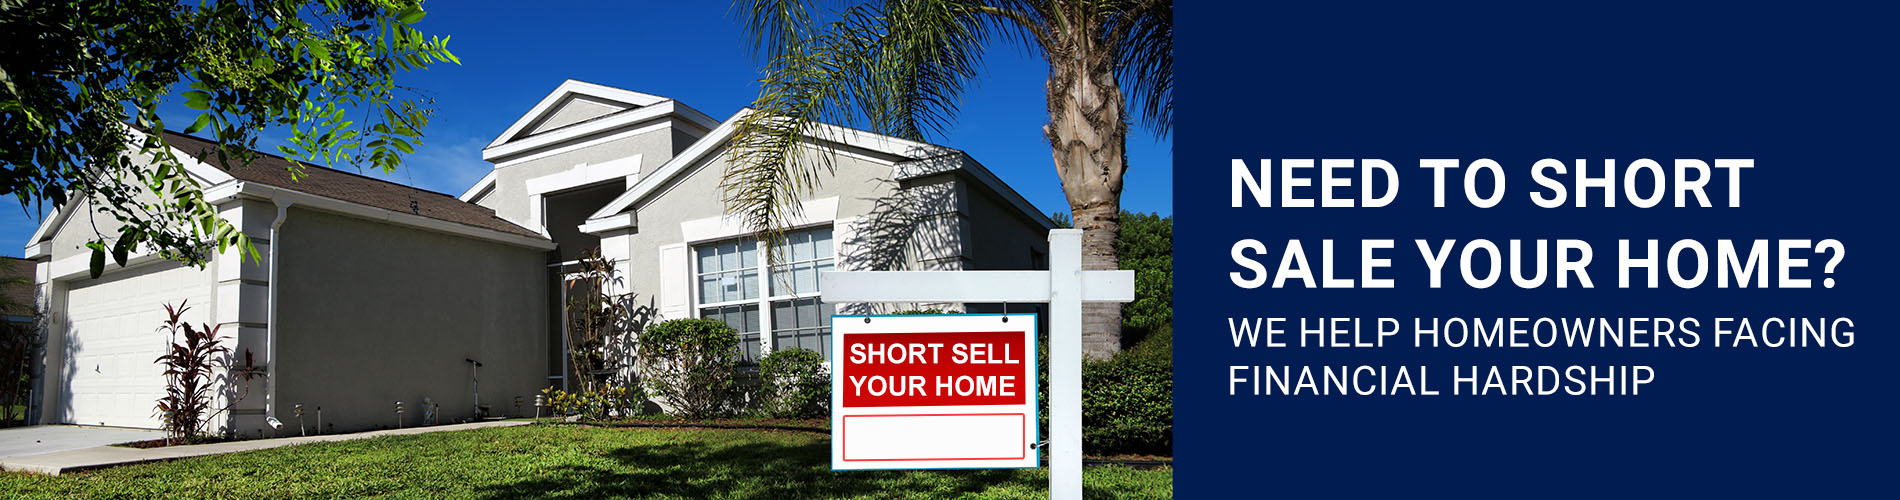 Need To Short Sale Your Home? We HELP homeowners facing financial hardship